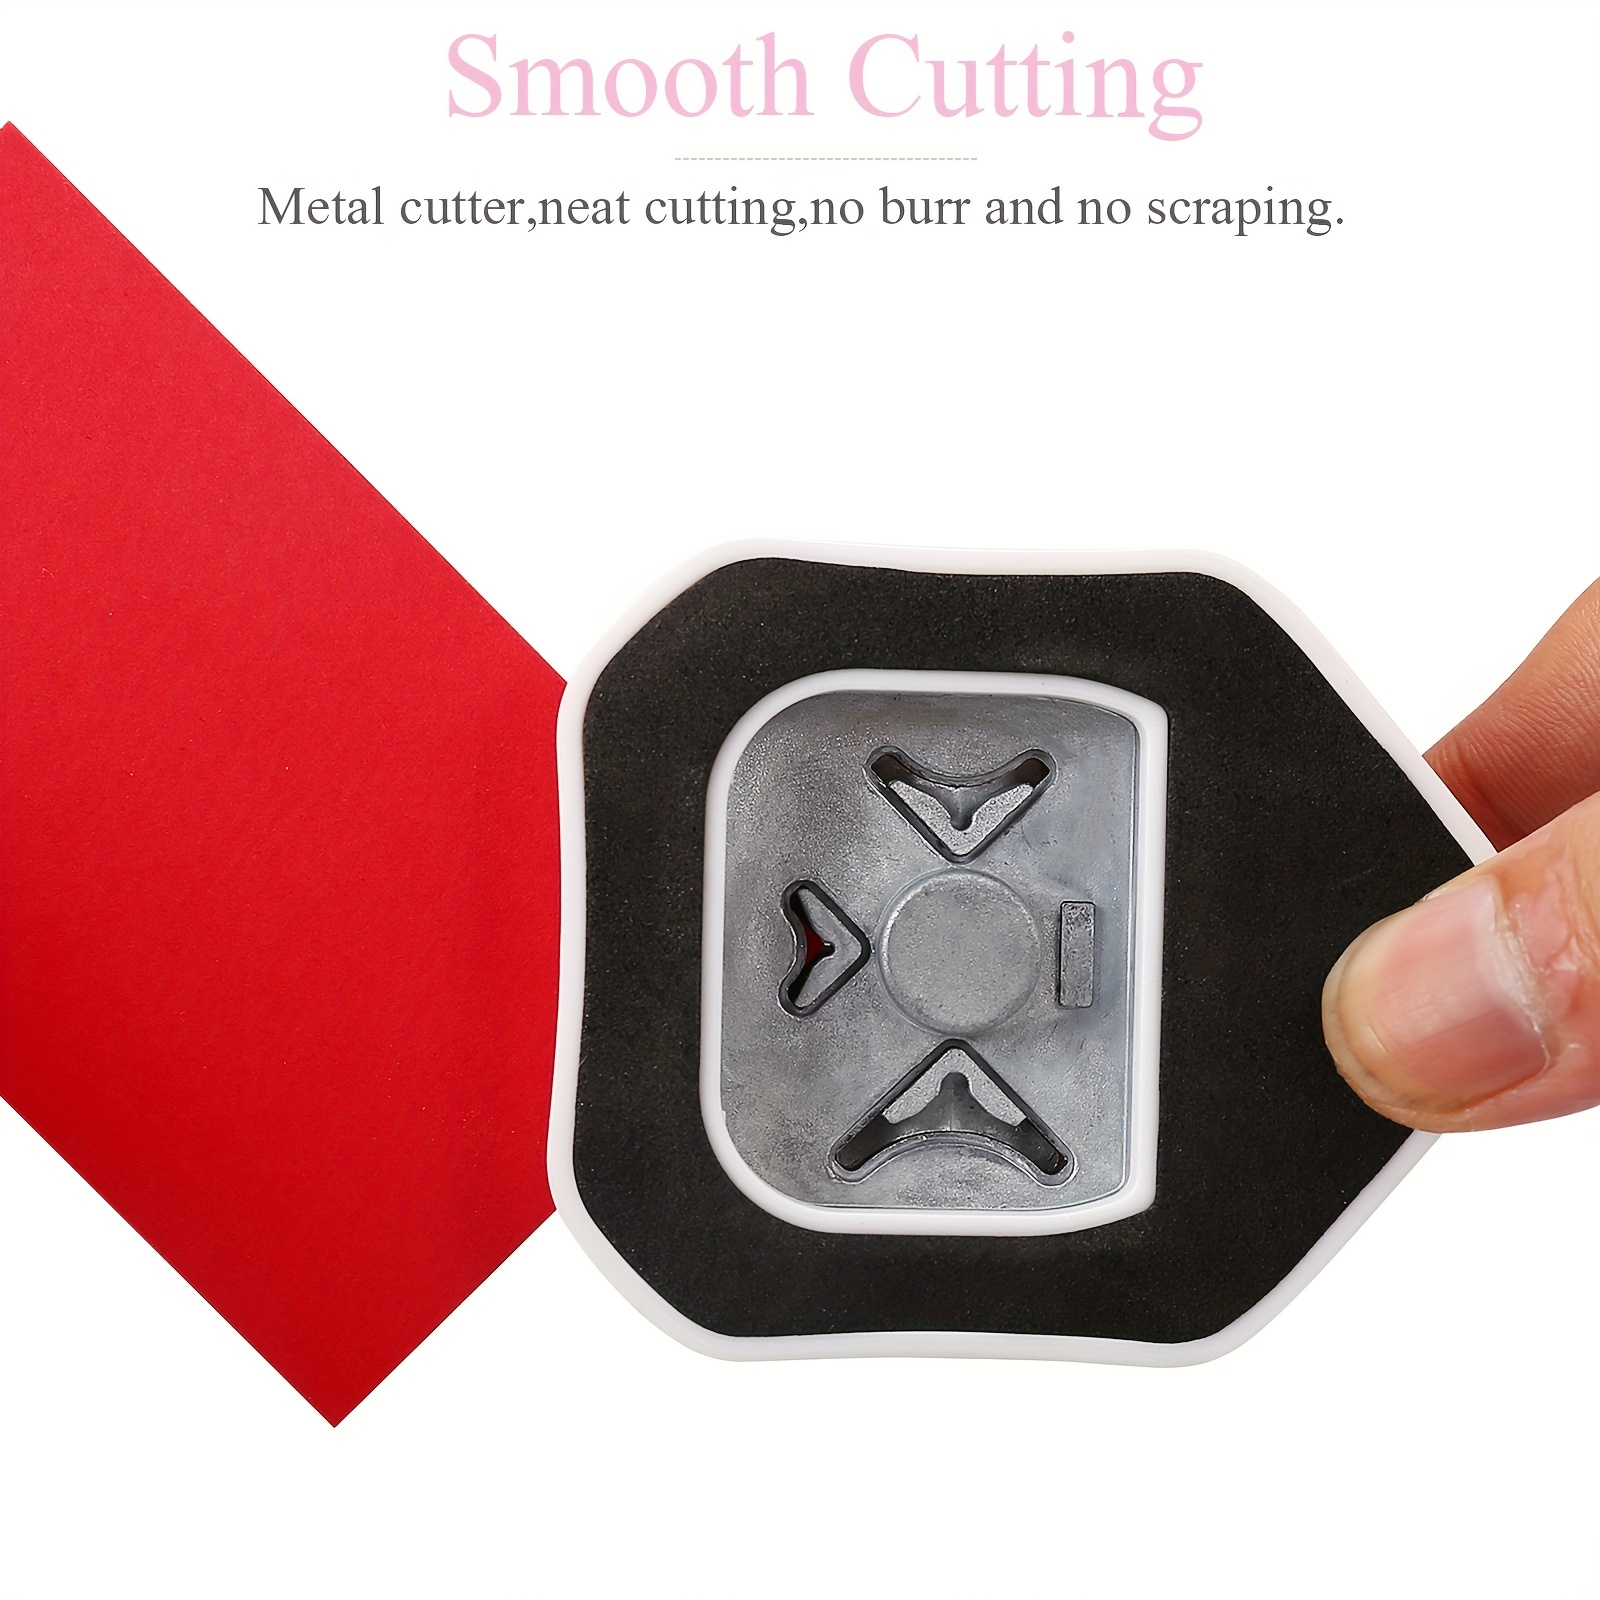 ECOHU Round Corner Punch 3 in 1-3 Way Corner Puncher Cutter for Paper Craft  (R4mm+R7mm+R10mm) for Cutting Different Corners DIY Projects Card Making &  Scrapbooking Coner Punch B